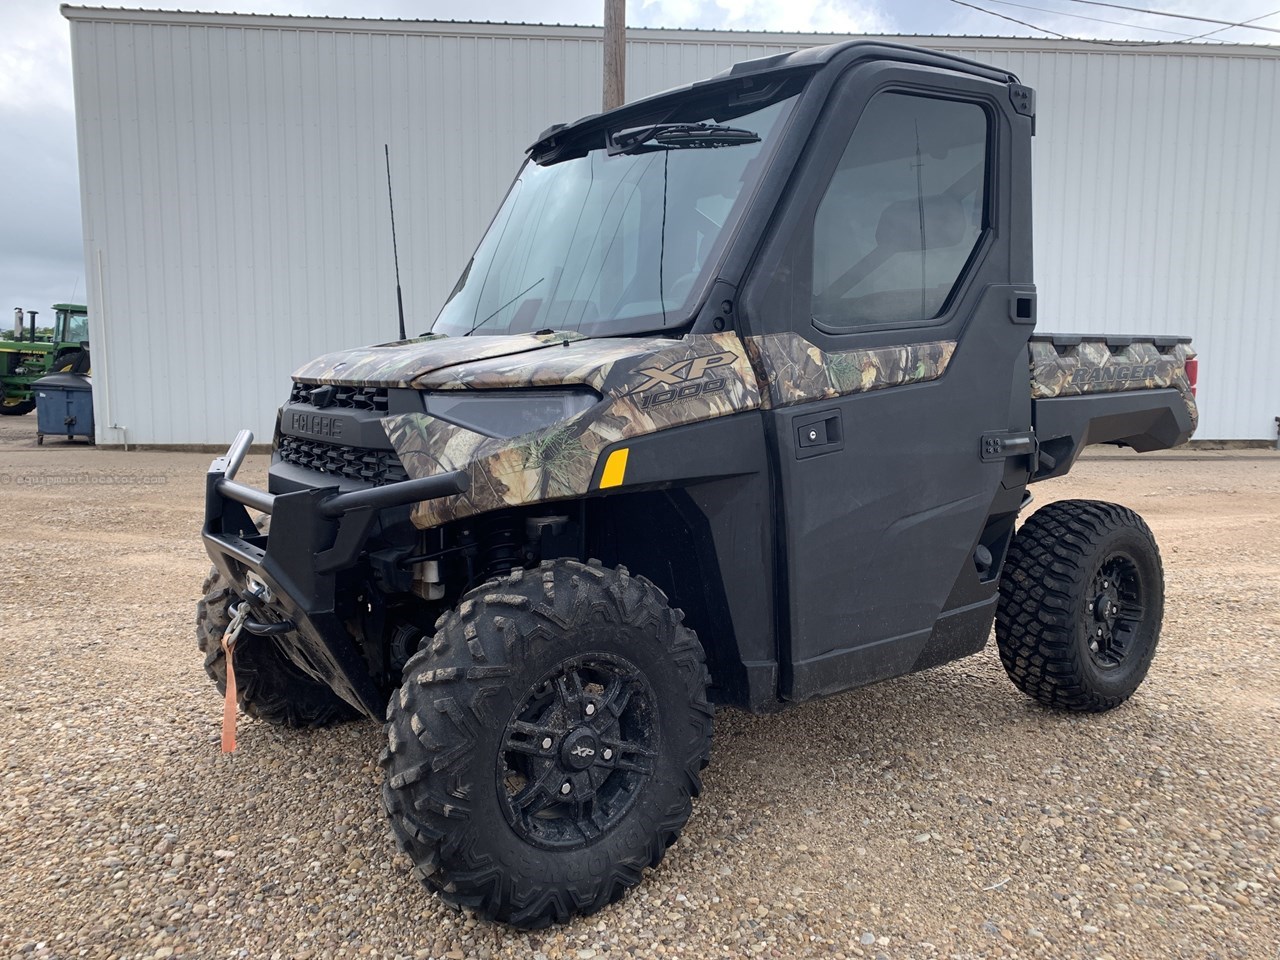 2021 Polaris RANGER XP 1000 NorthStar Ultimate Utility Vehicle For Sale in  Dalhart Texas